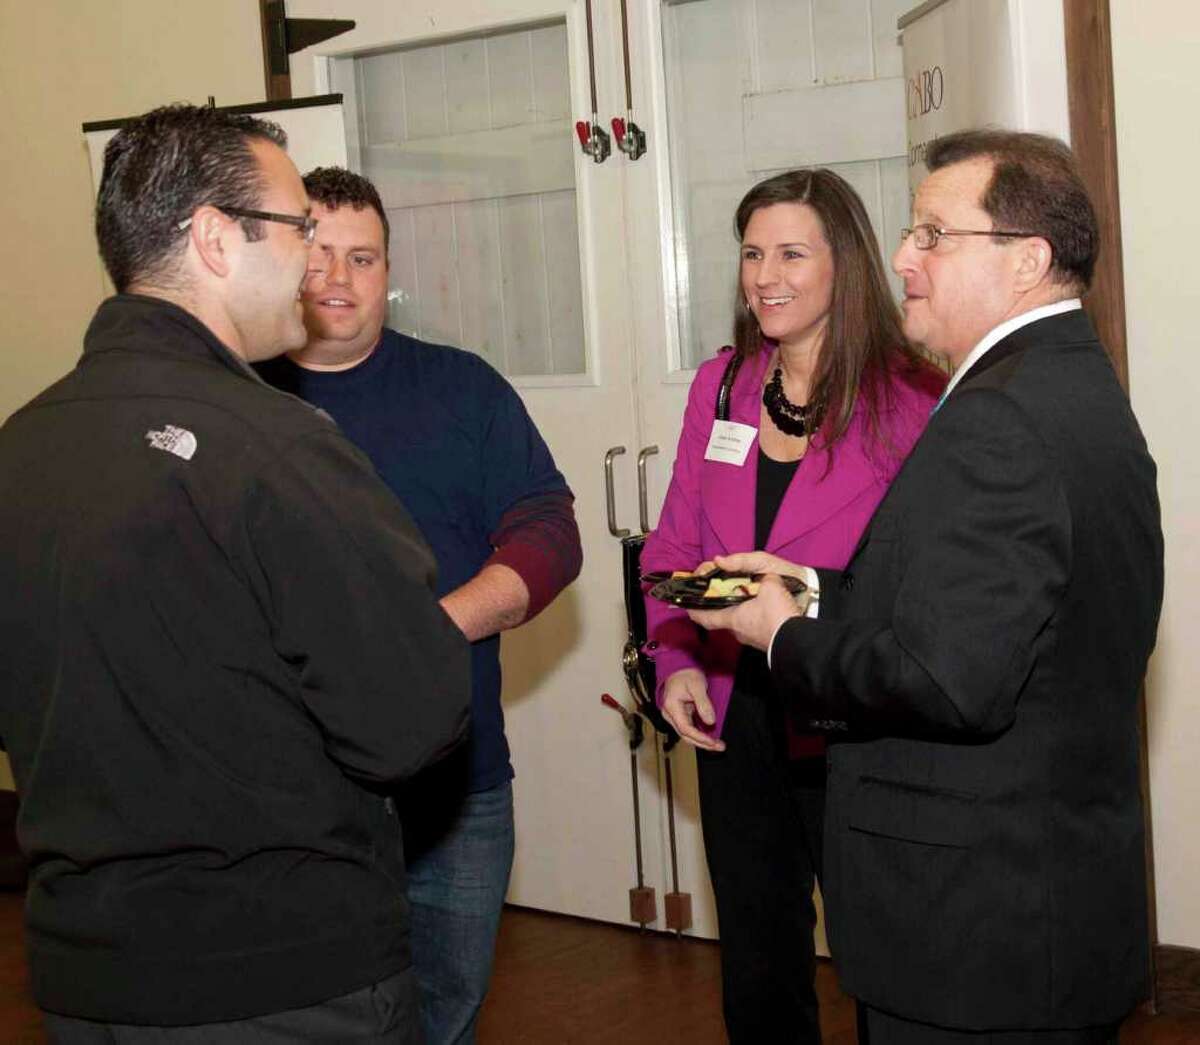 Clockwise from top, Lucas Papageorge, owner of Fairfield-based LCP General Contractors; Kristin Andree, president of Southport-based Andree Media & Consulting; Fairfield-based cosmetic dentist Joe Worthington; and chiropractor Robert Mazal talk at a Connecticut Alliance for Business Opportunities networking event on Thursday, April 14, 2011 at the Westport Country Playhouse.